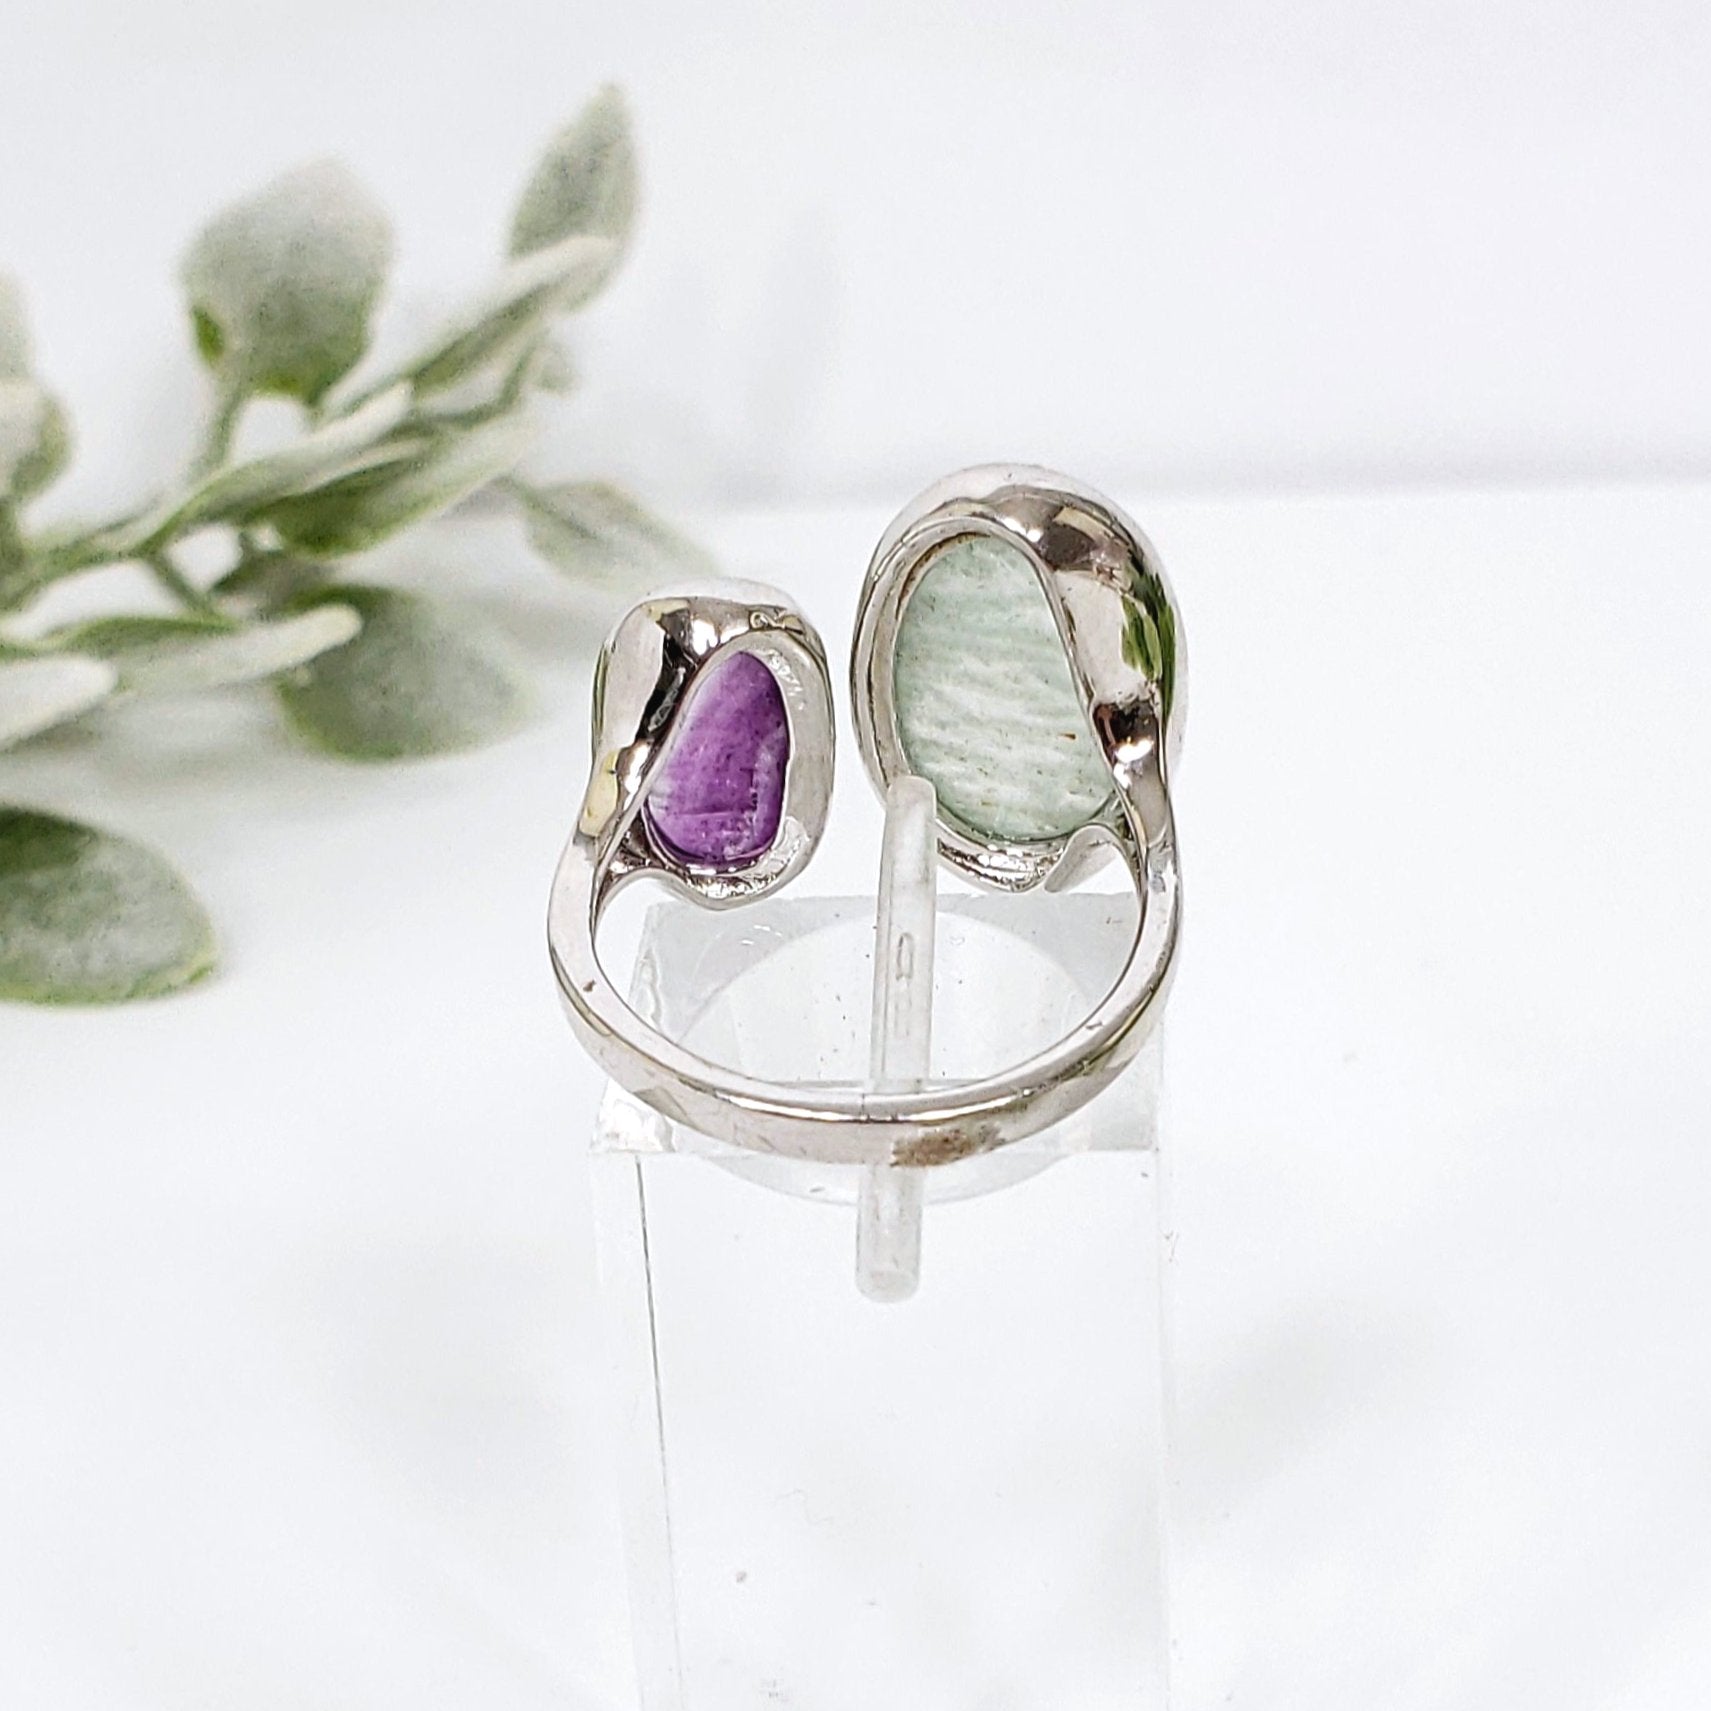 wear jewelry with intention - Amazonite and Purple Fluorite Crystal Ring